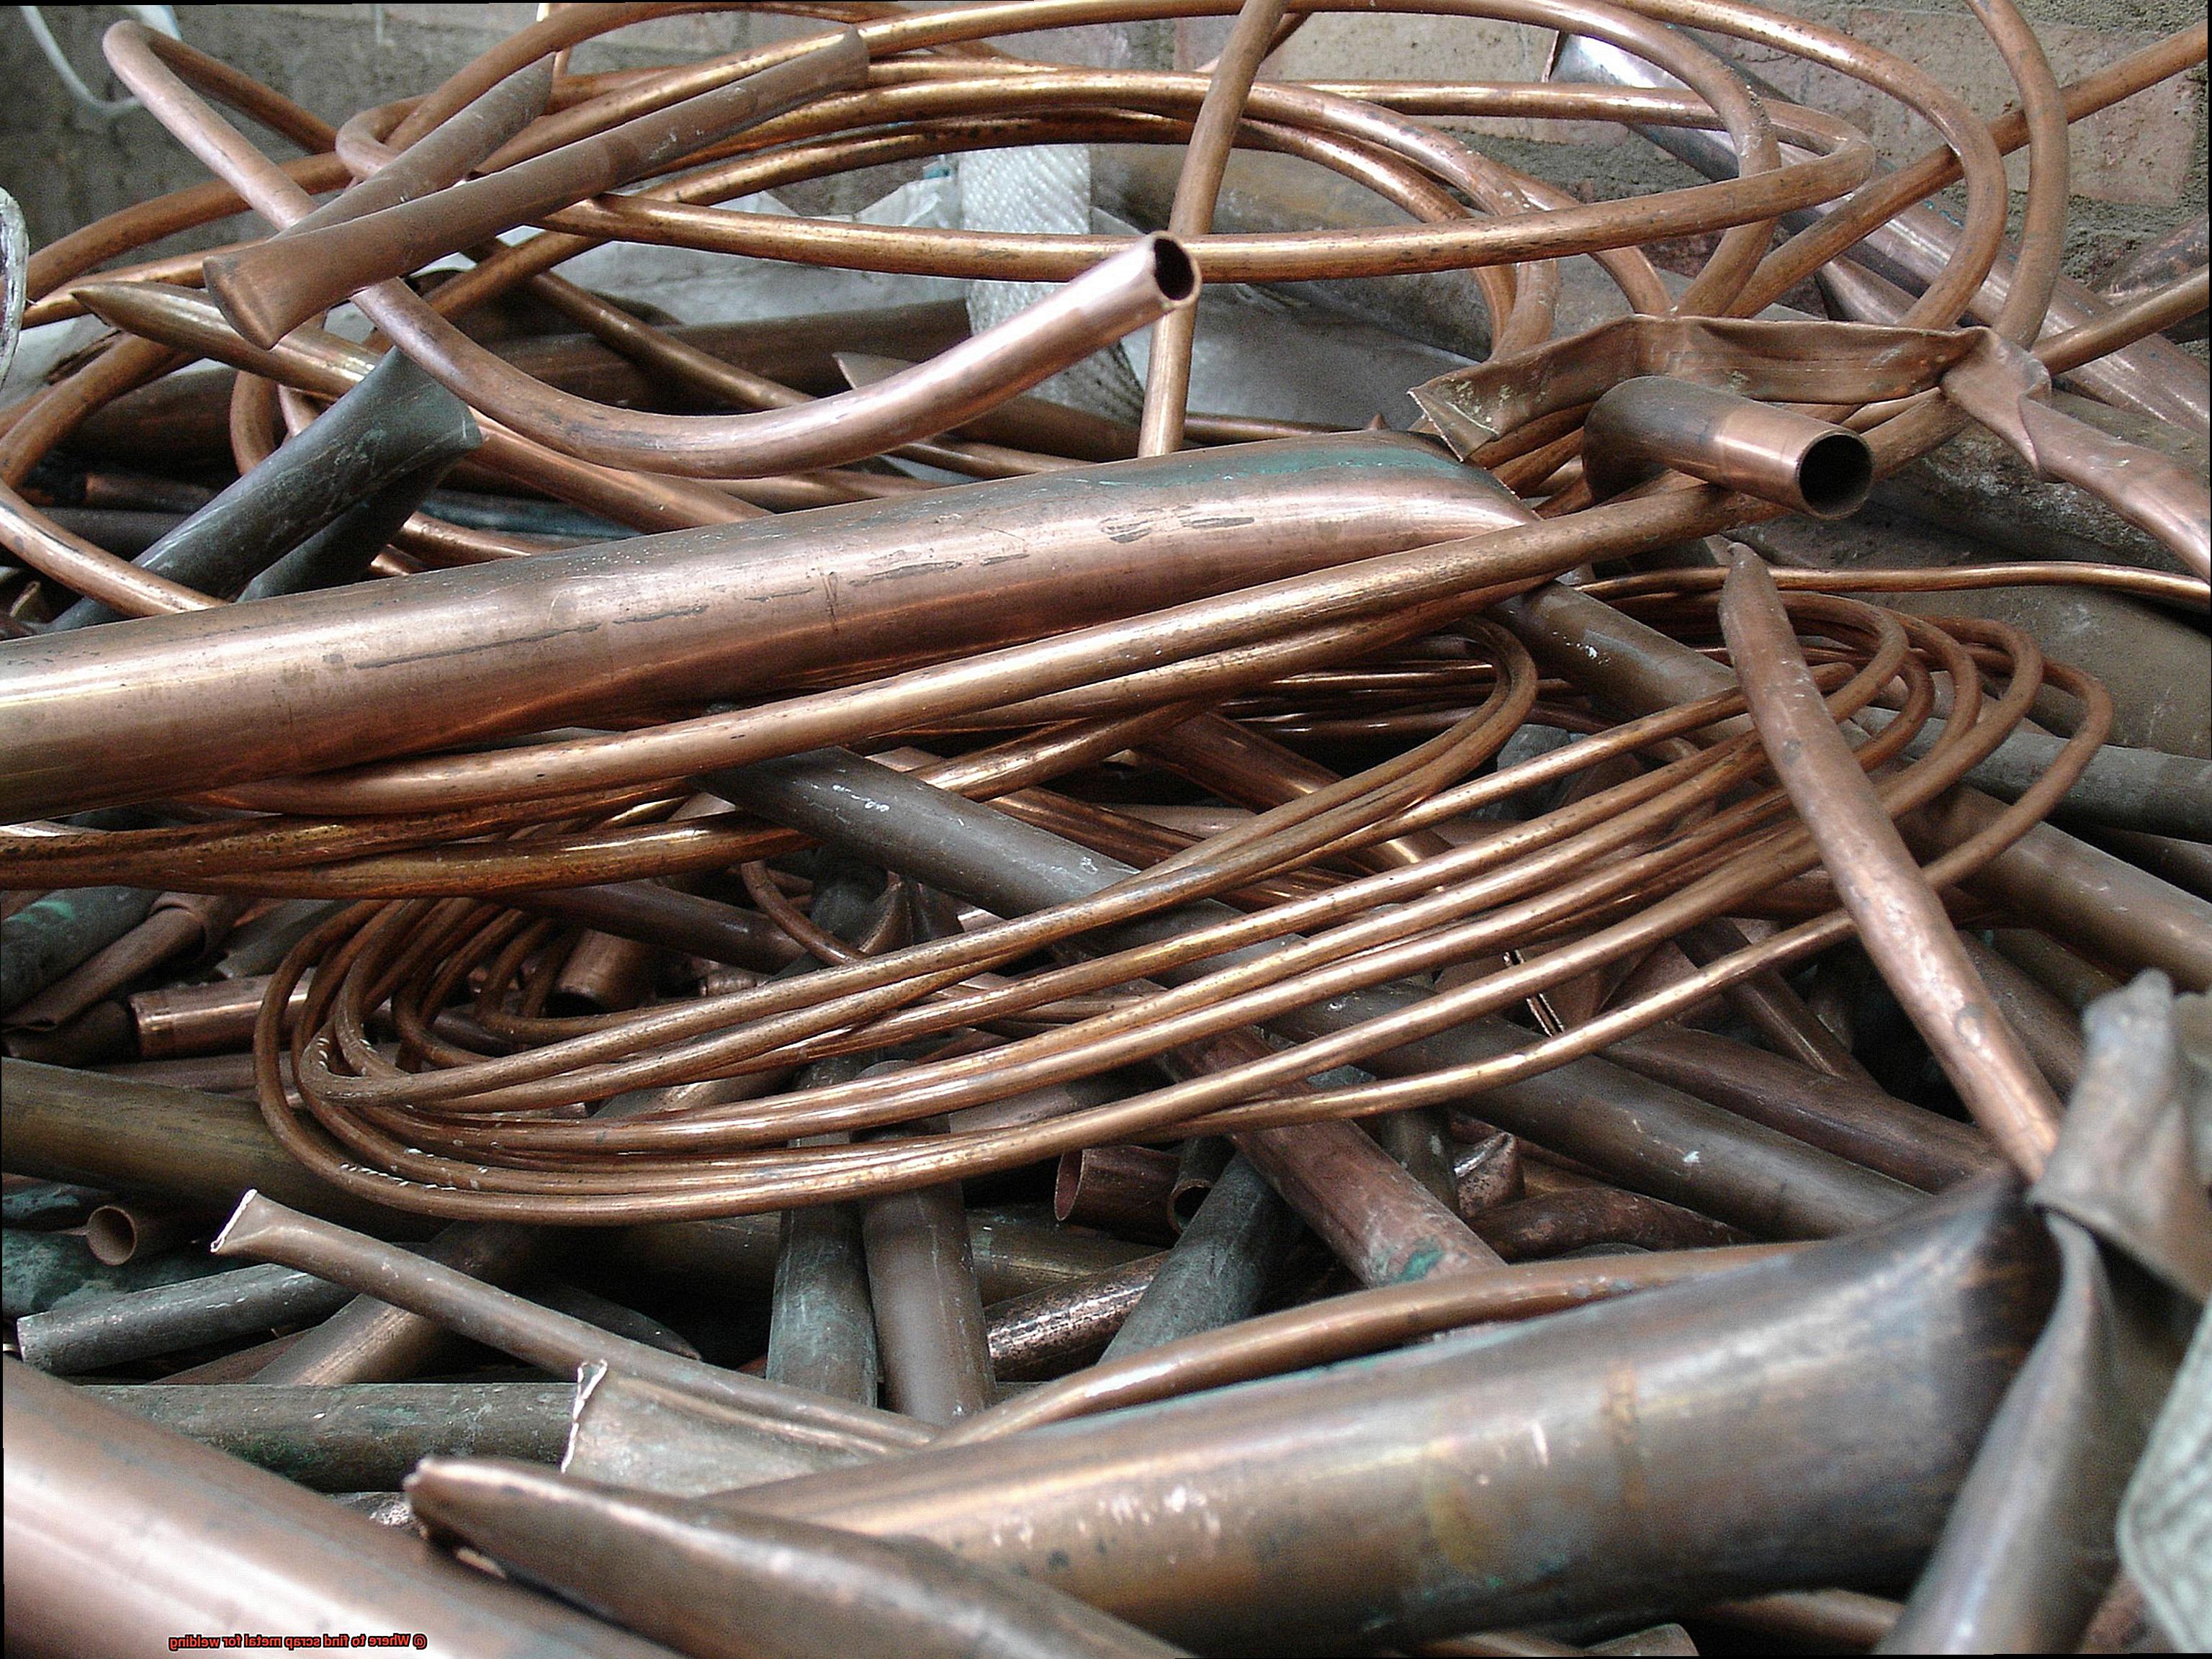 Where to find scrap metal for welding-2